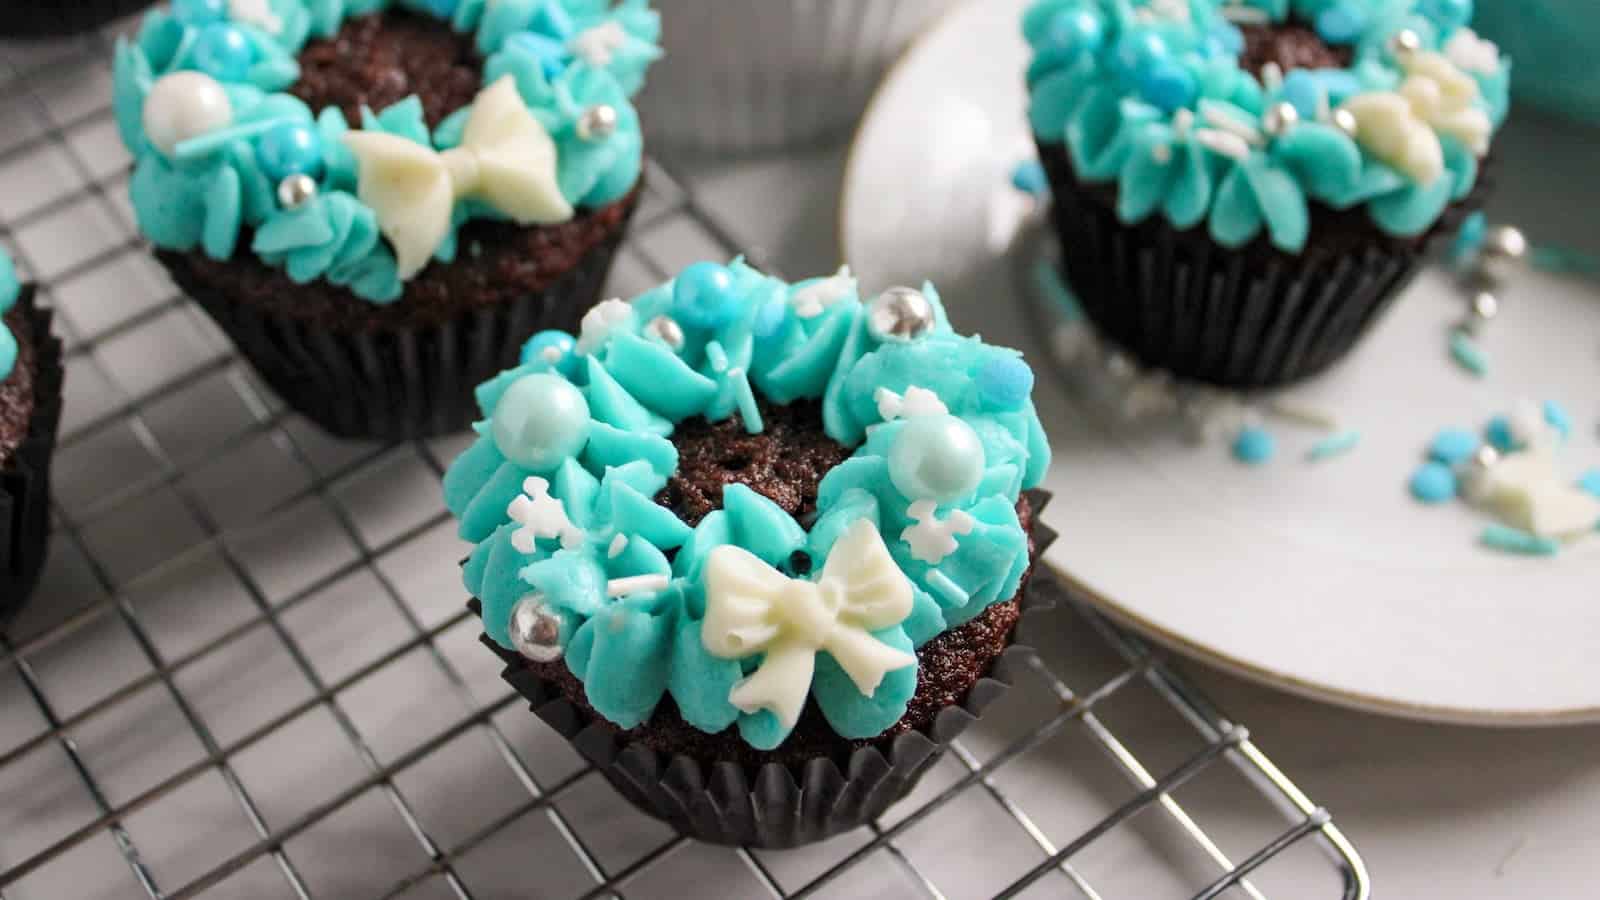 Christmas wreath cupcakes decorated with blue frosting on a cooling rack.